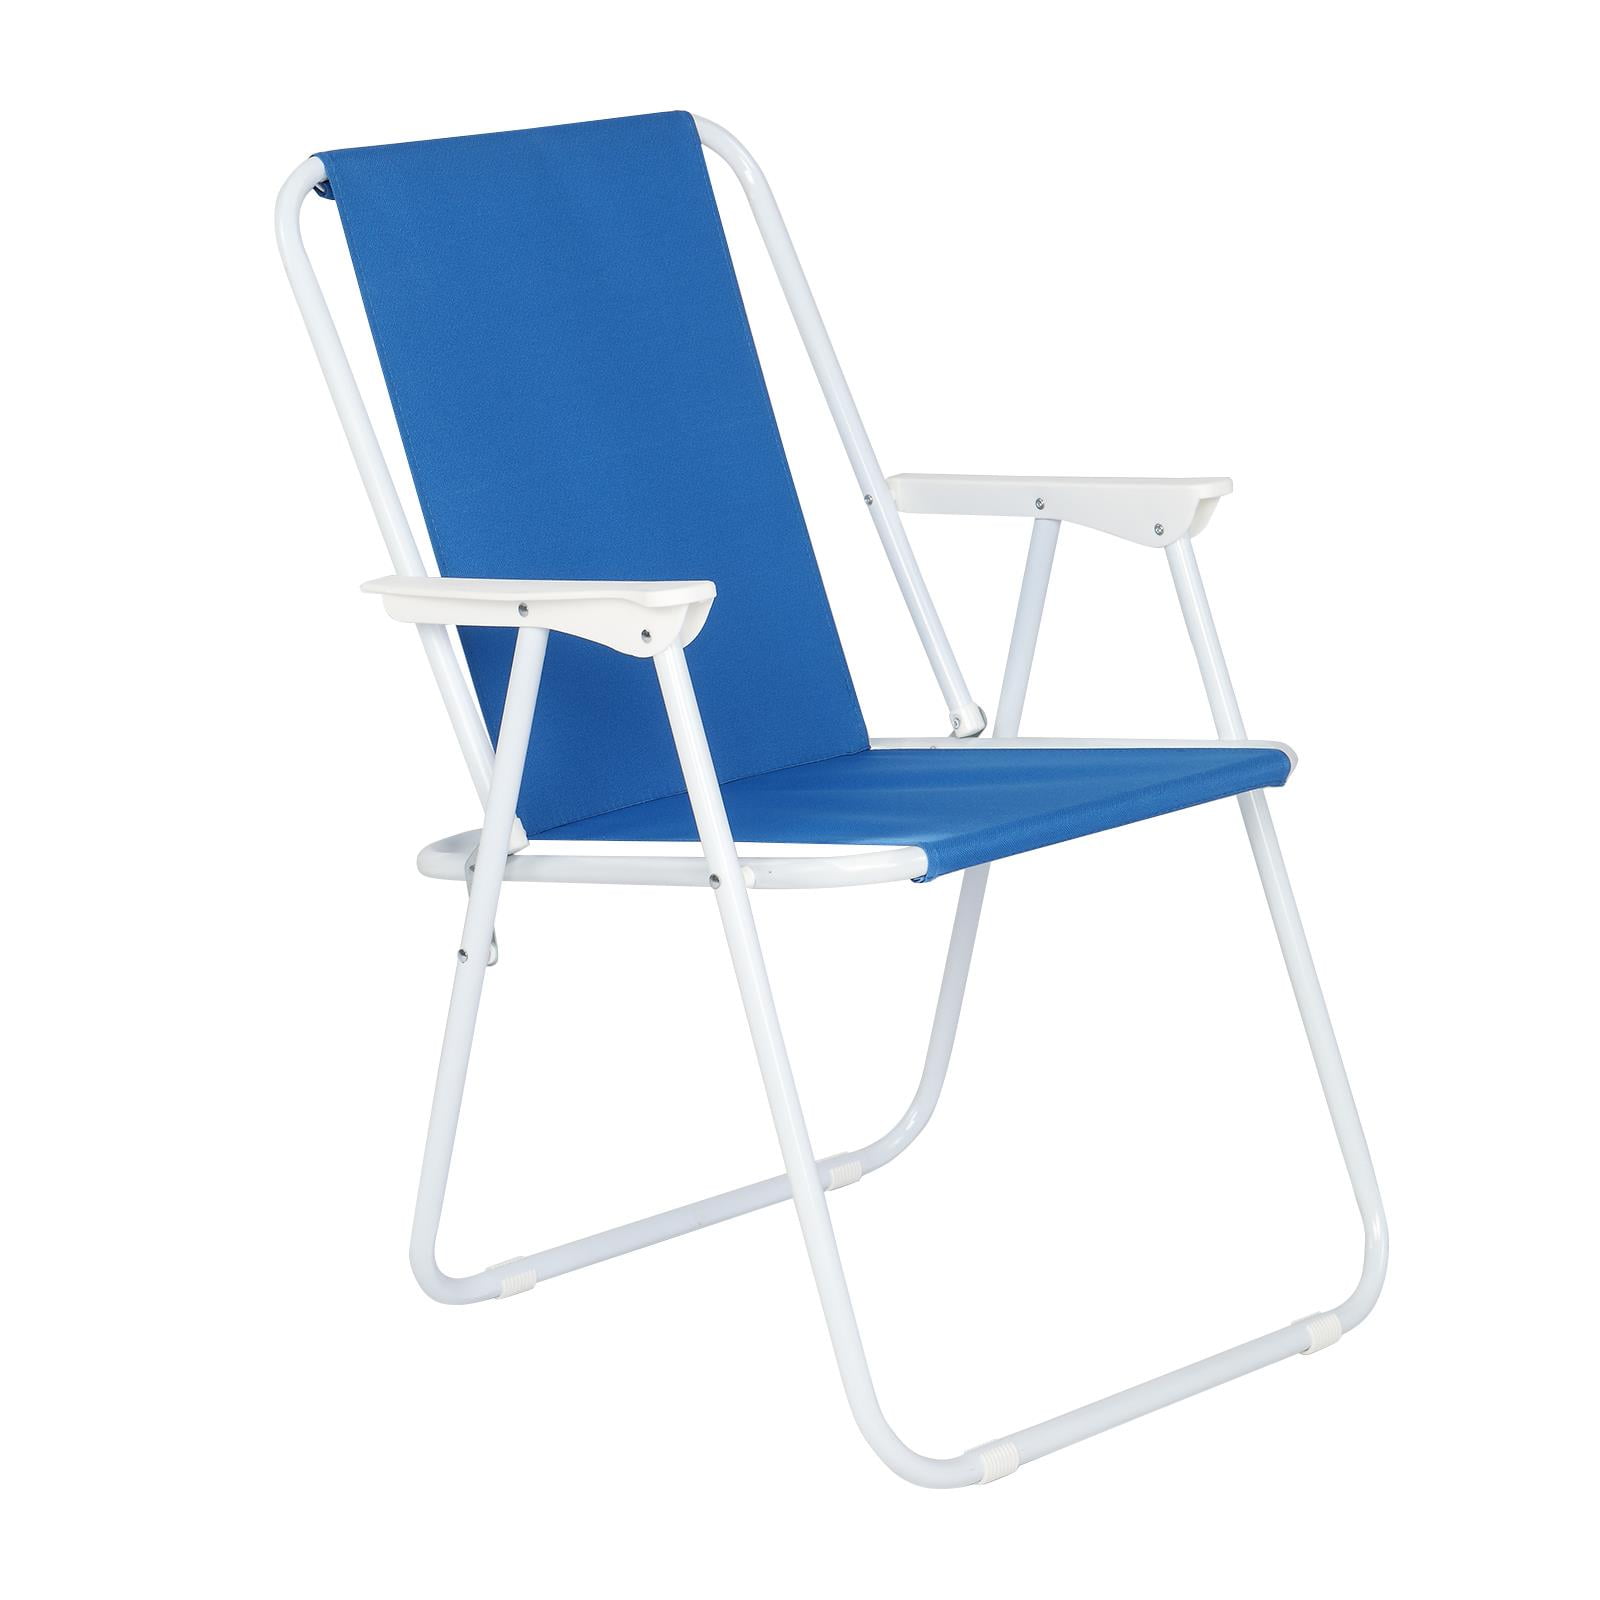 OverPatio Portable Beach Chair Folding Recliner Lounge Solid ...